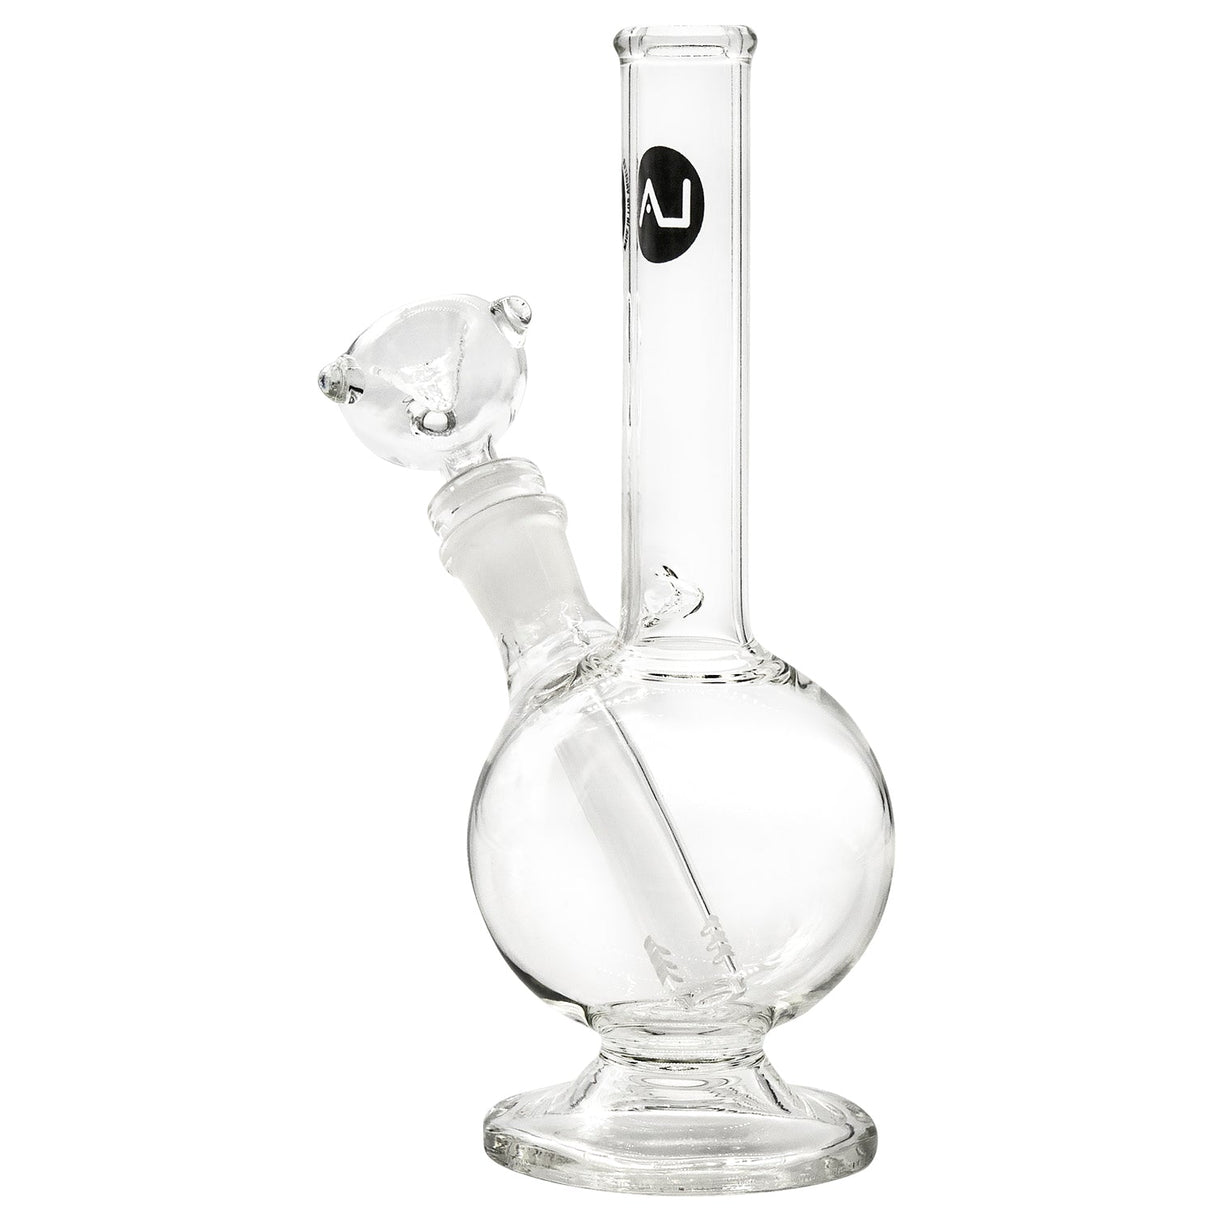 LA Pipes Pedestal Basic Bong with 45 Degree Joint, 8" Height, and Bubble Design